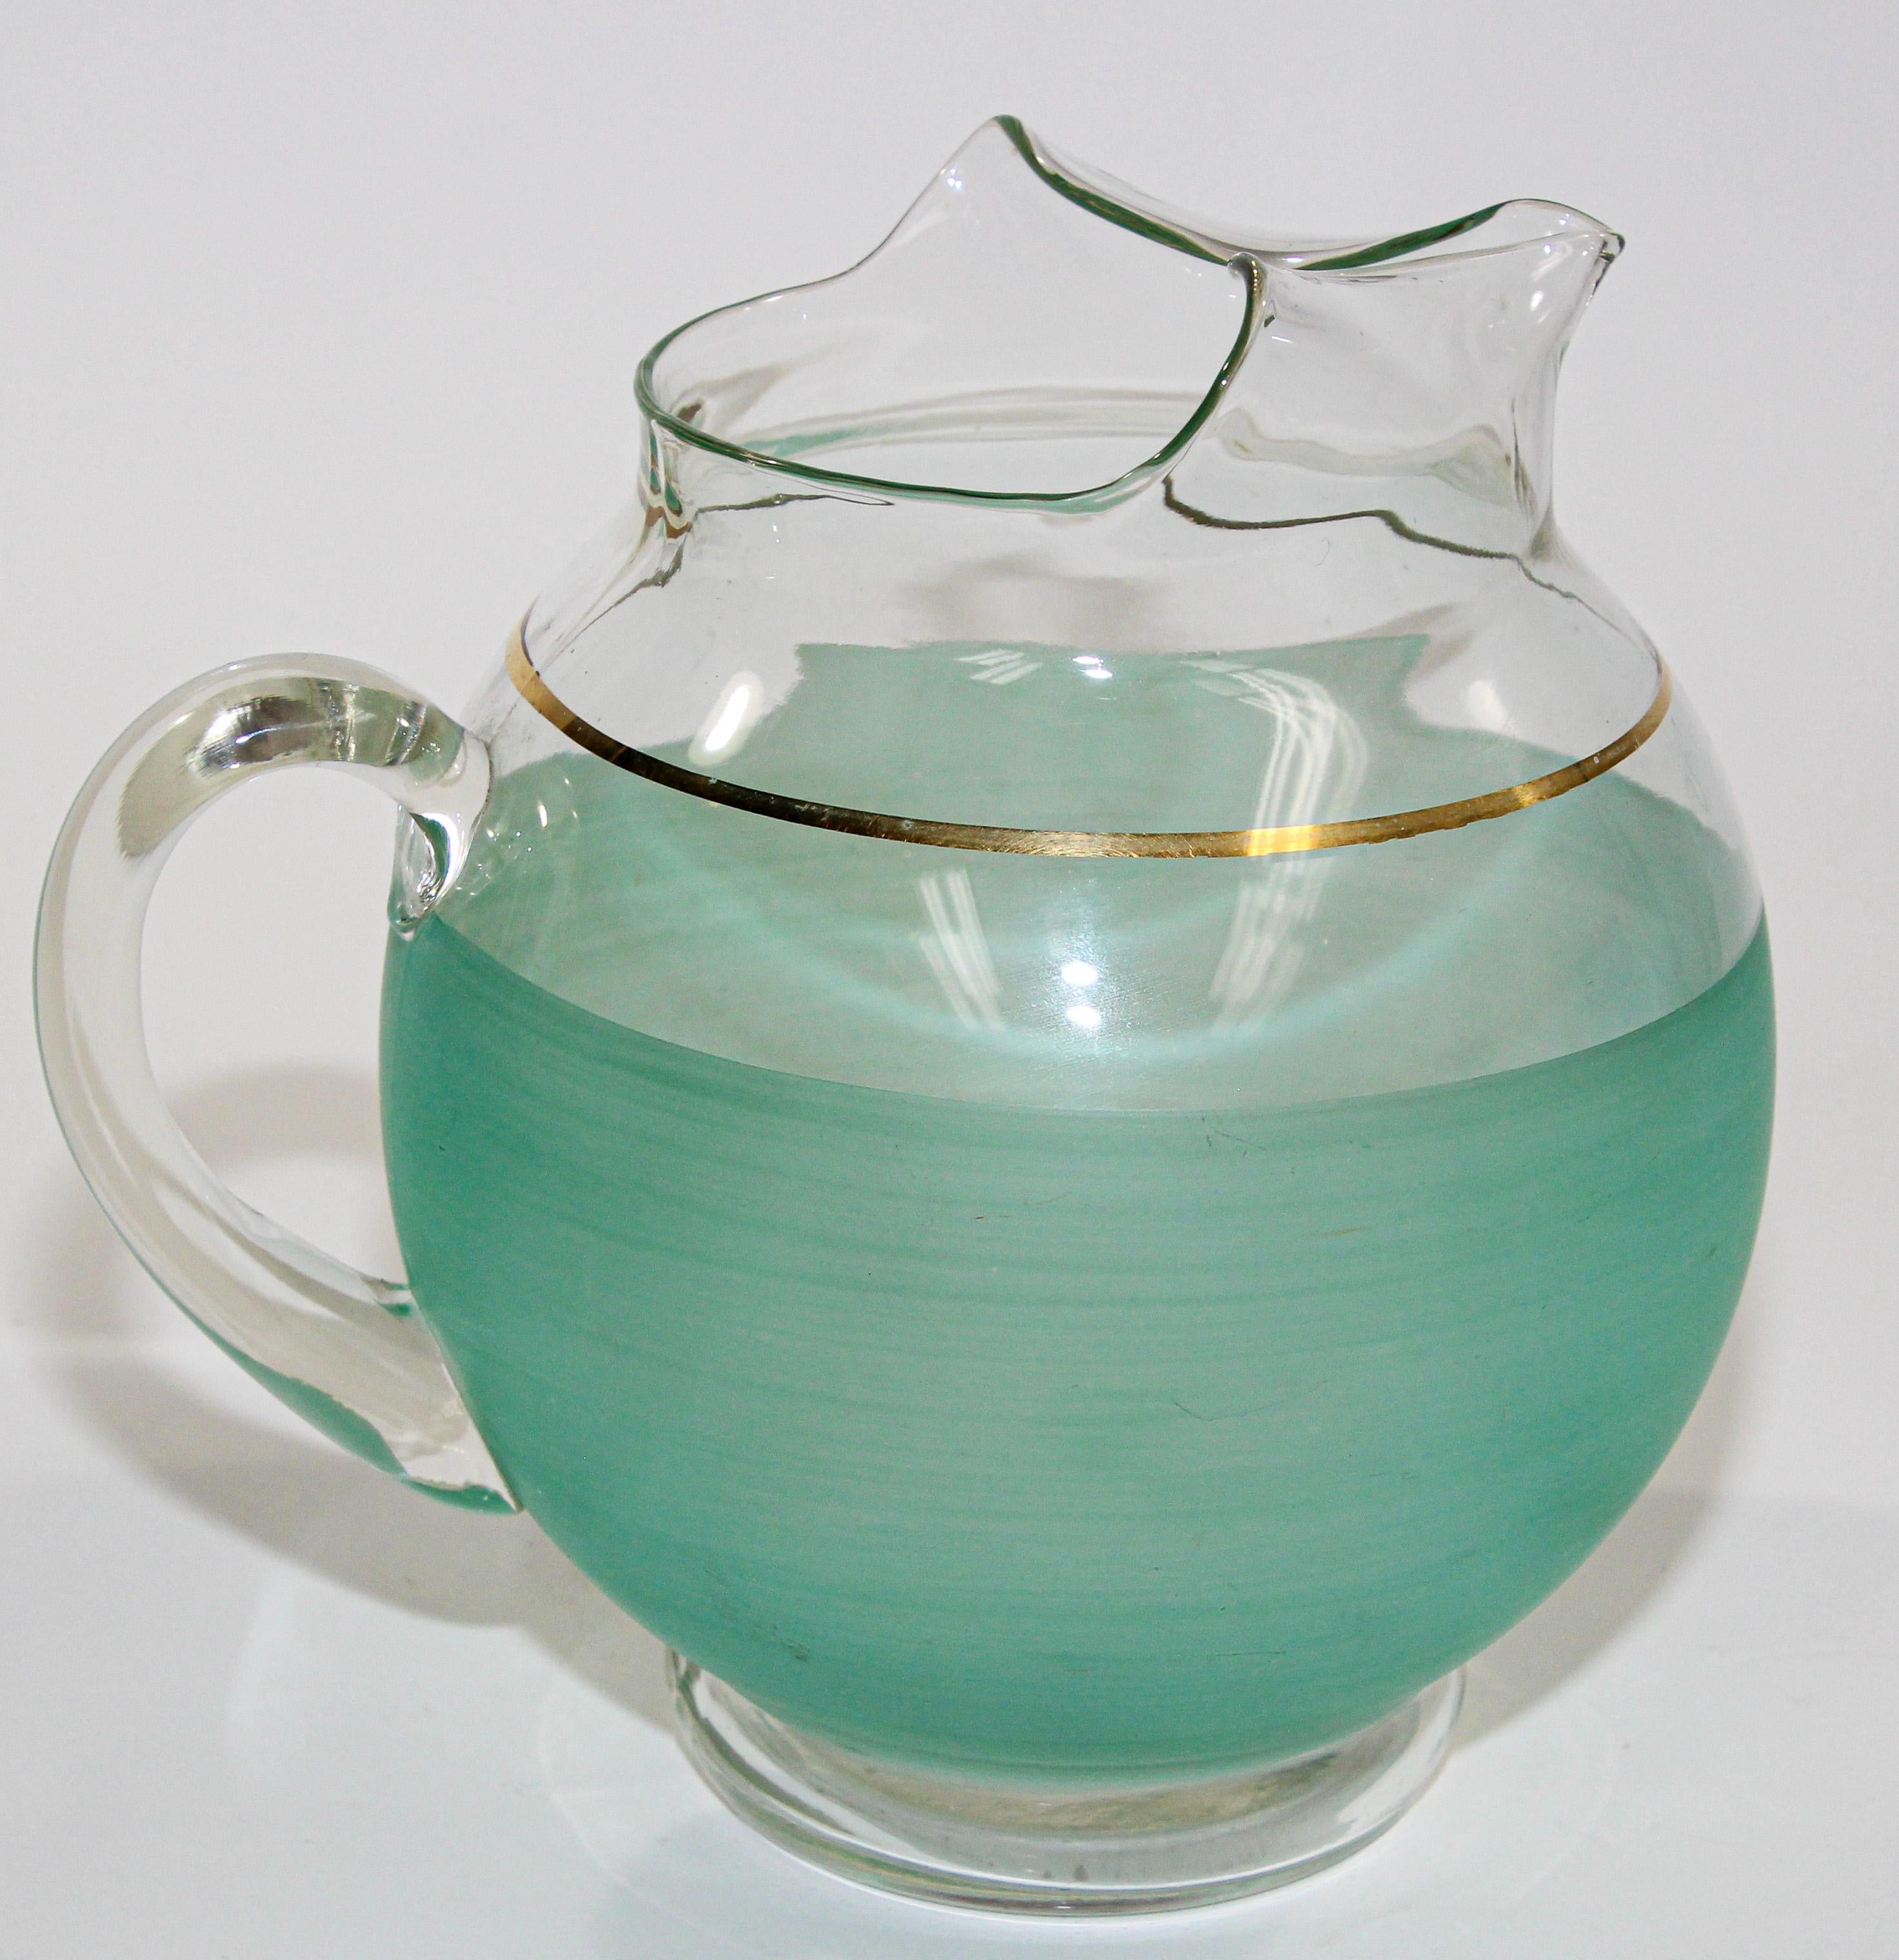 Vintage pastel green glass ware pitcher, American collectible.
1960s Green Glass Pitcher American Collectible Barware.
Gorgeous 1960s Blendo green large pitcher with gold trim, produced by the West Virginia Glass Specialty Company. 
This vintage